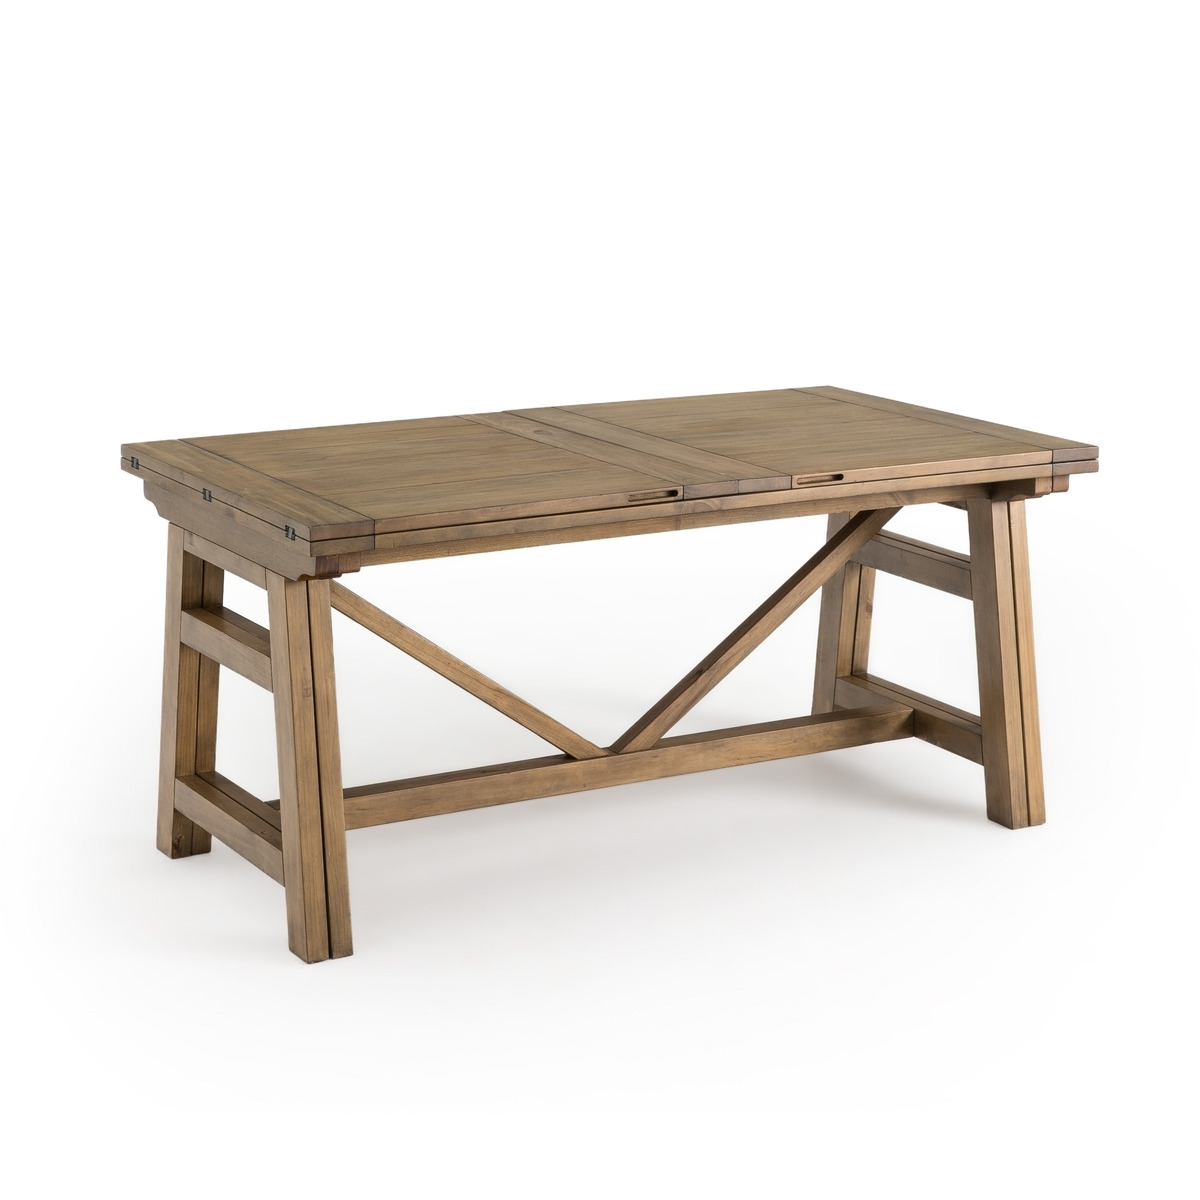 Wabi Solid Pine Extendable Dining Table, Seats 6-12 - image 1